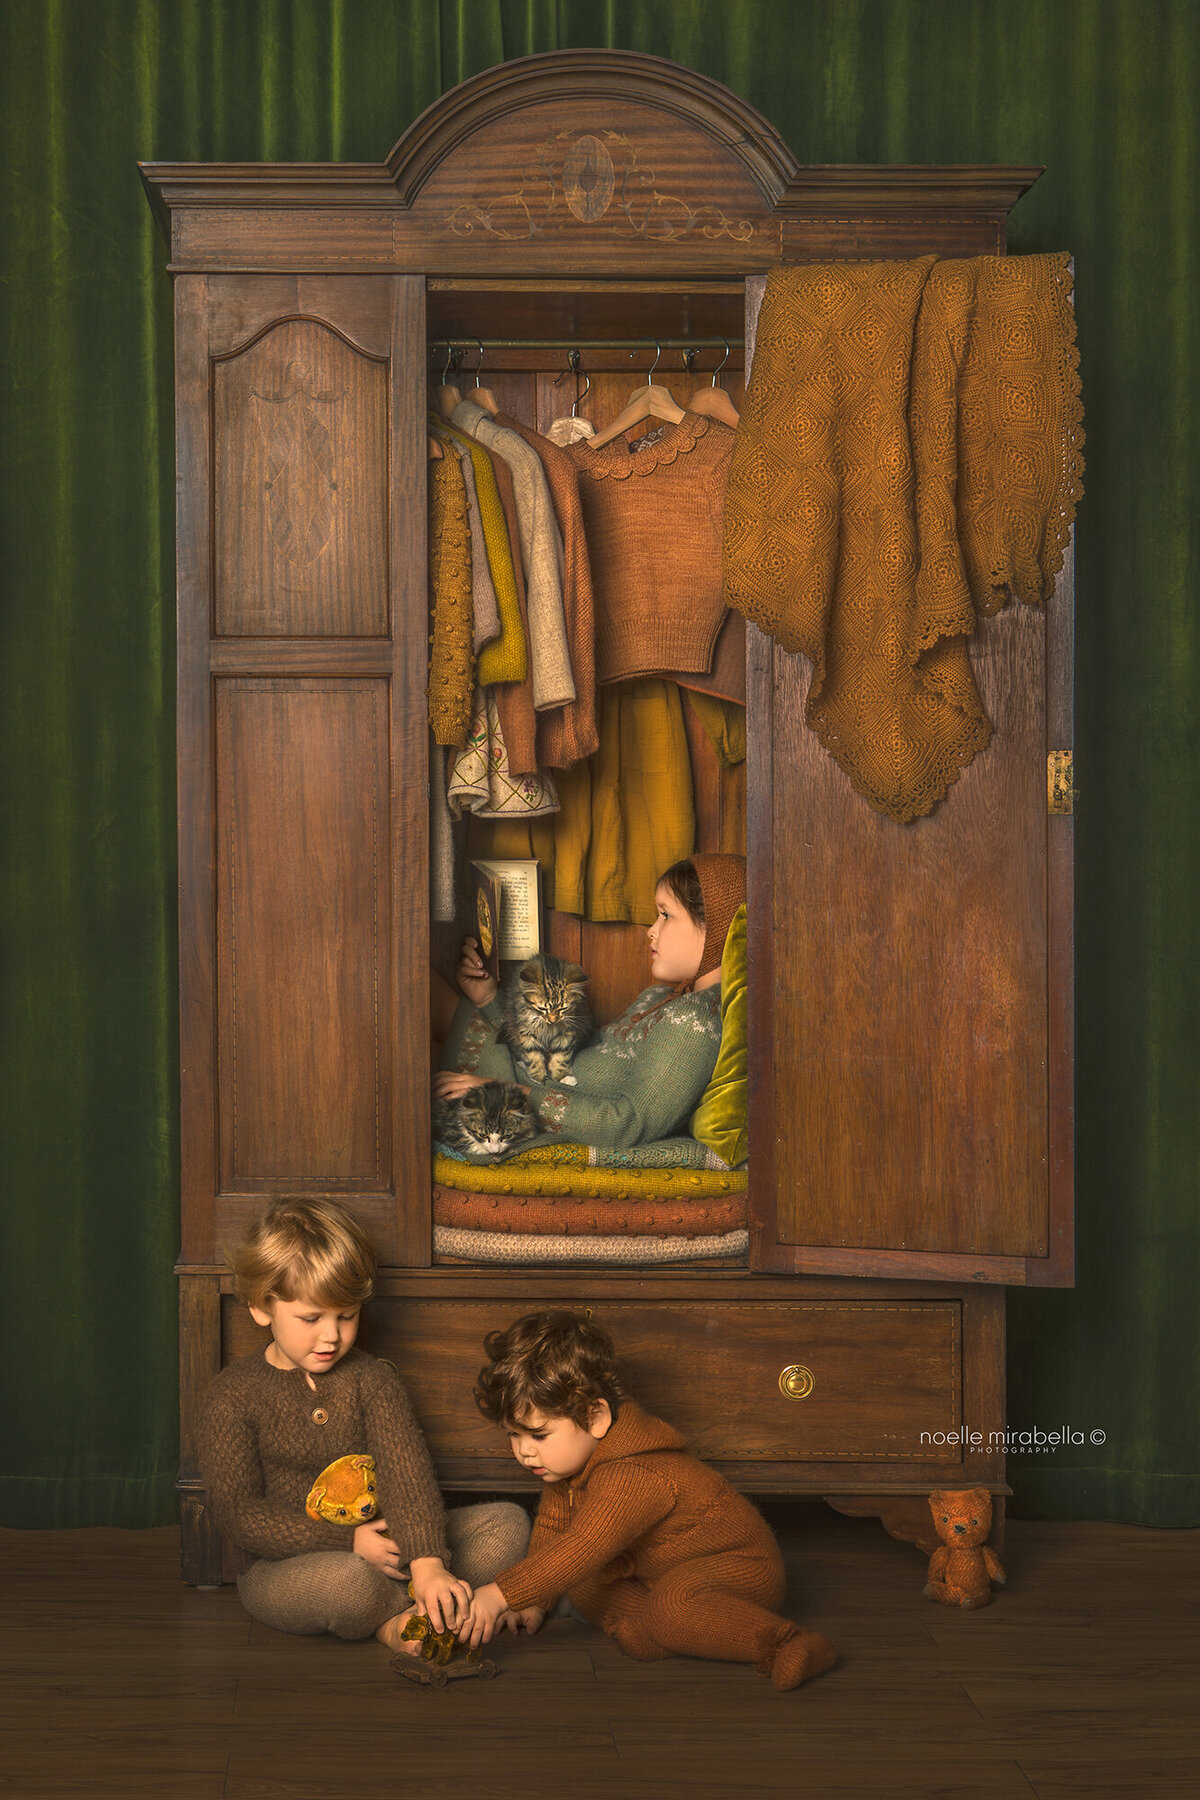 Children reading and playing in wardrobe full of clothes.